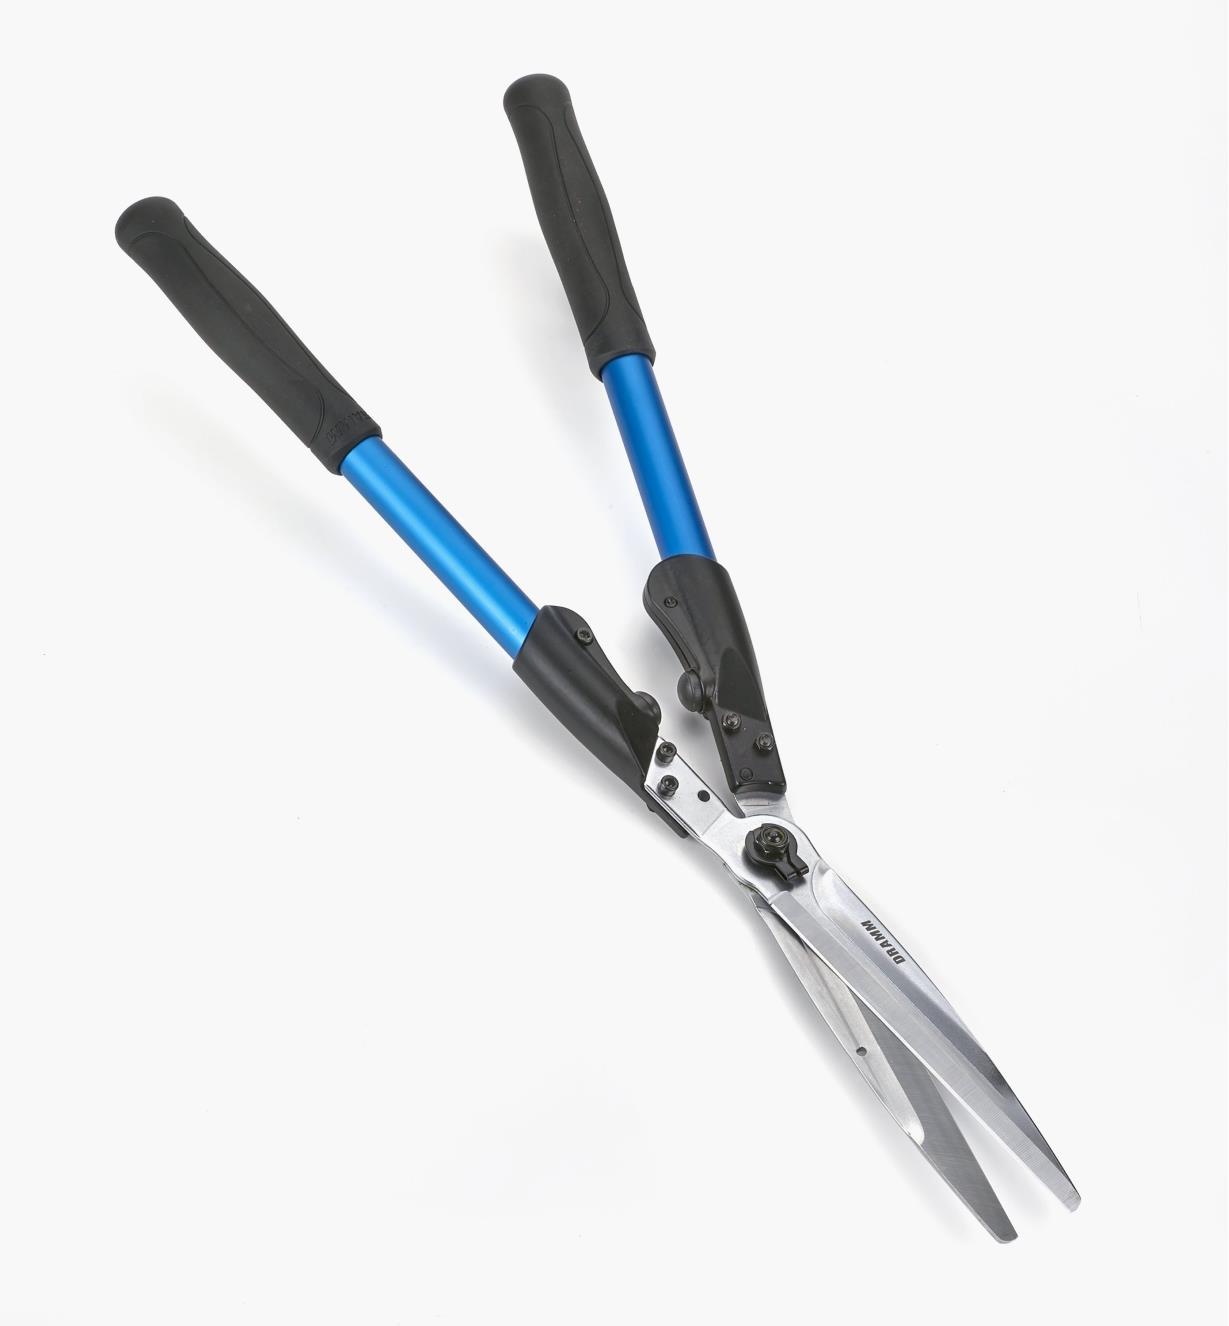 99W9152 - Hedge Shears with blue handles